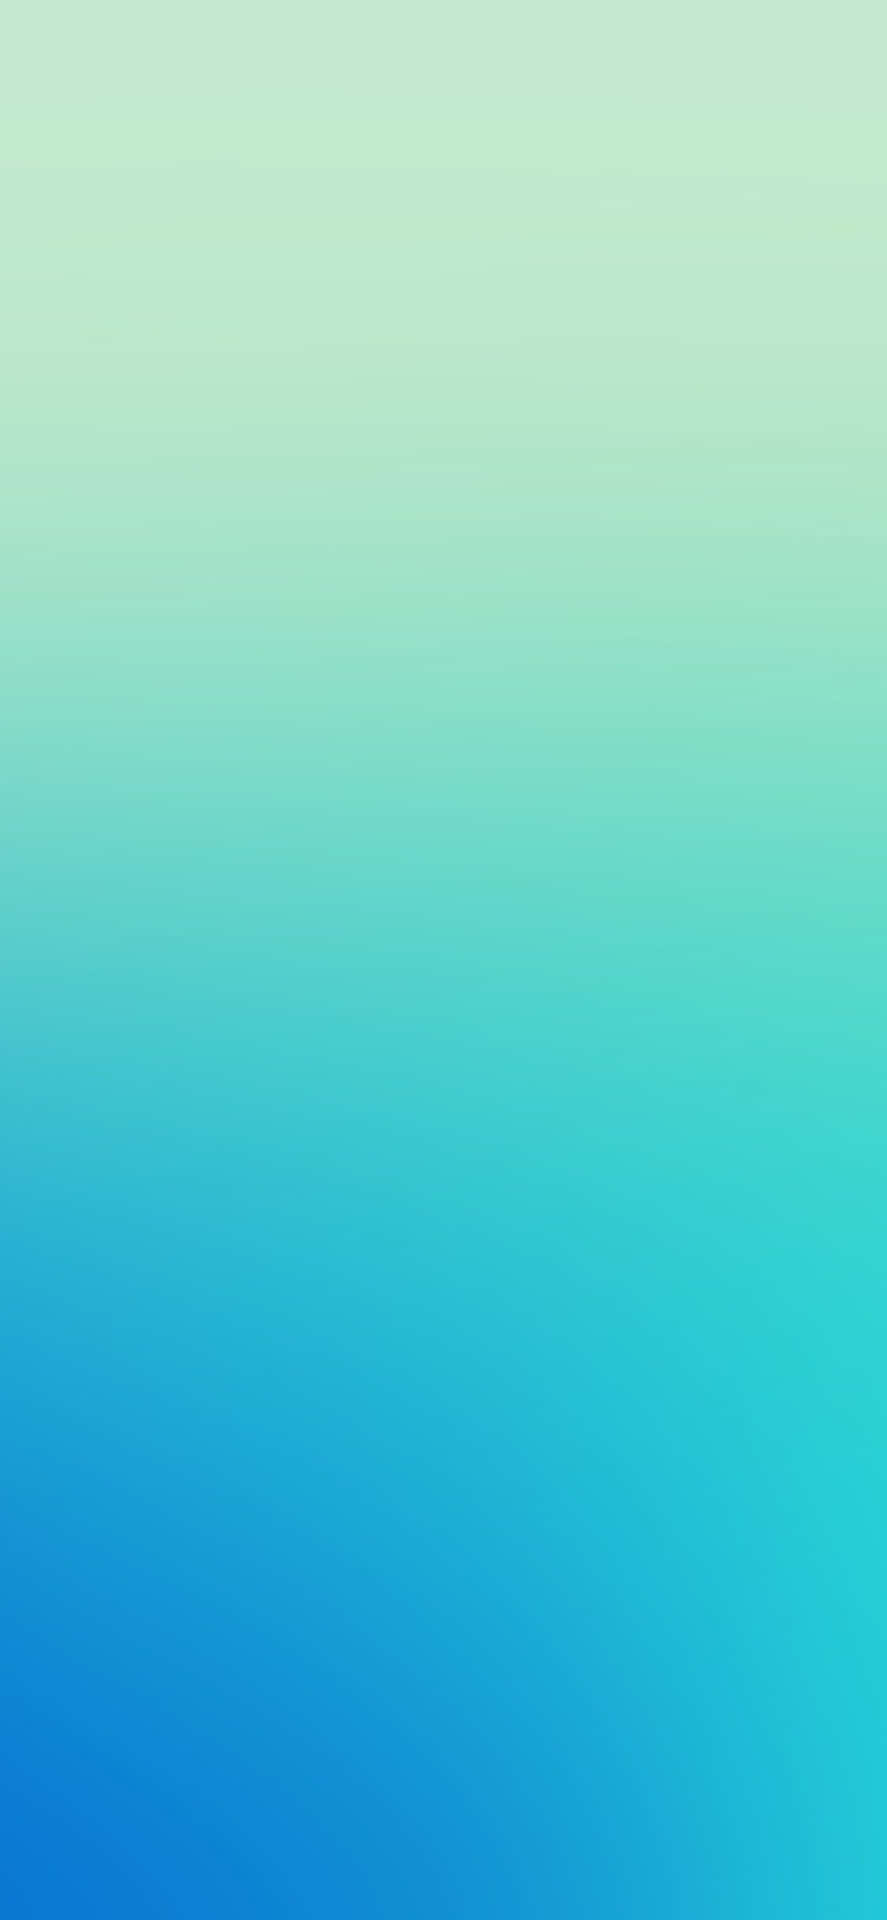 A Blue And Green Gradient Background Wallpaper